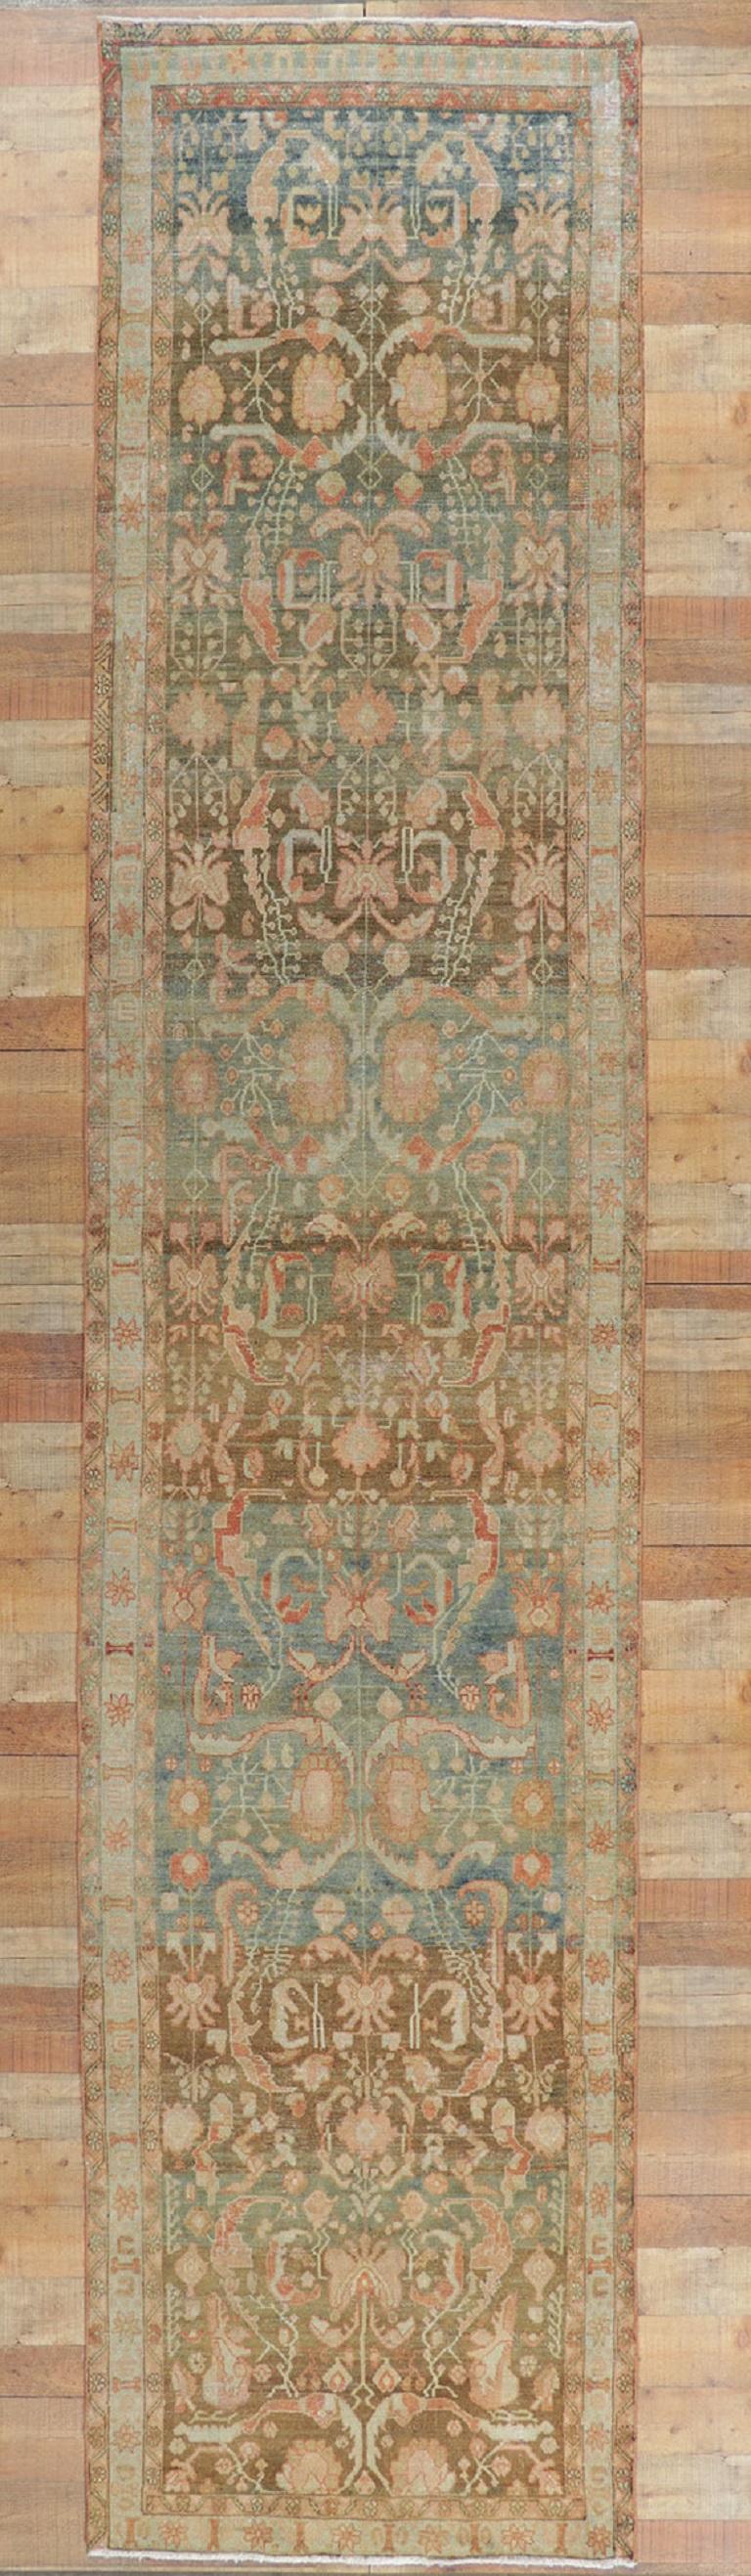 Antique-Worn Persian Malayer Rug, Earth-Tone Elegance Meets Relaxed Refinement For Sale 2